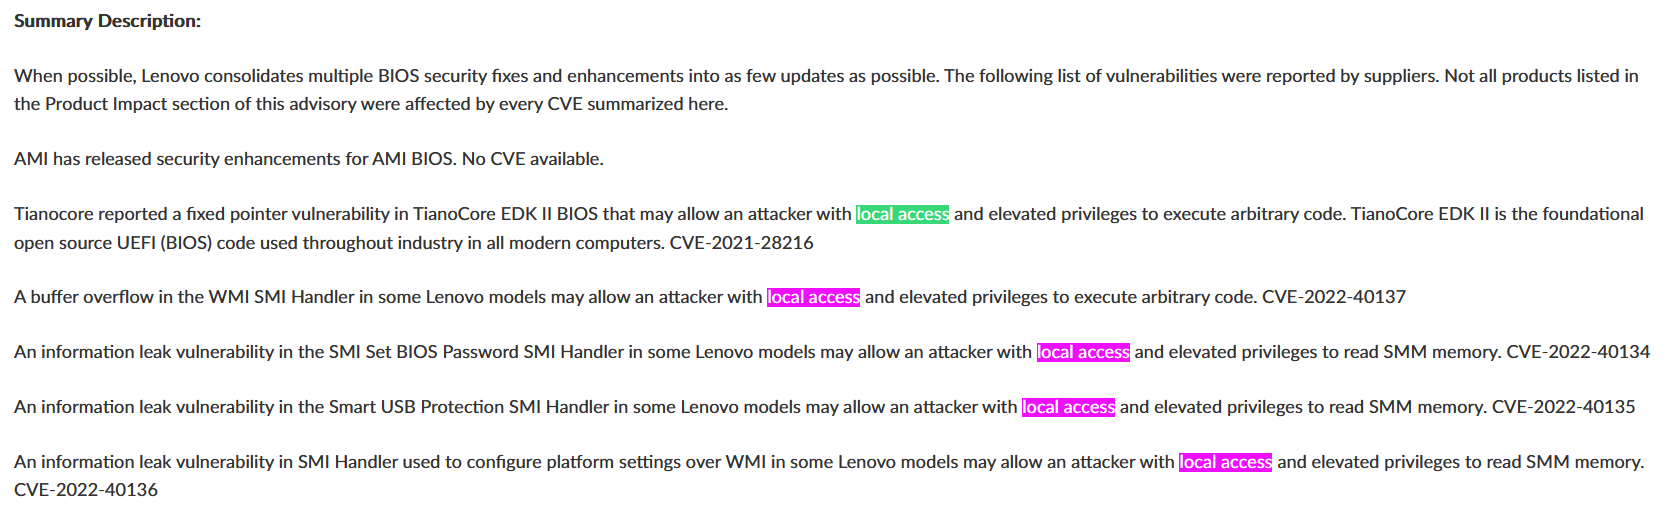 Will VTs for these Lenovo BIOS CVEs be added? - Vulnerability Tests -  Greenbone Community Forum